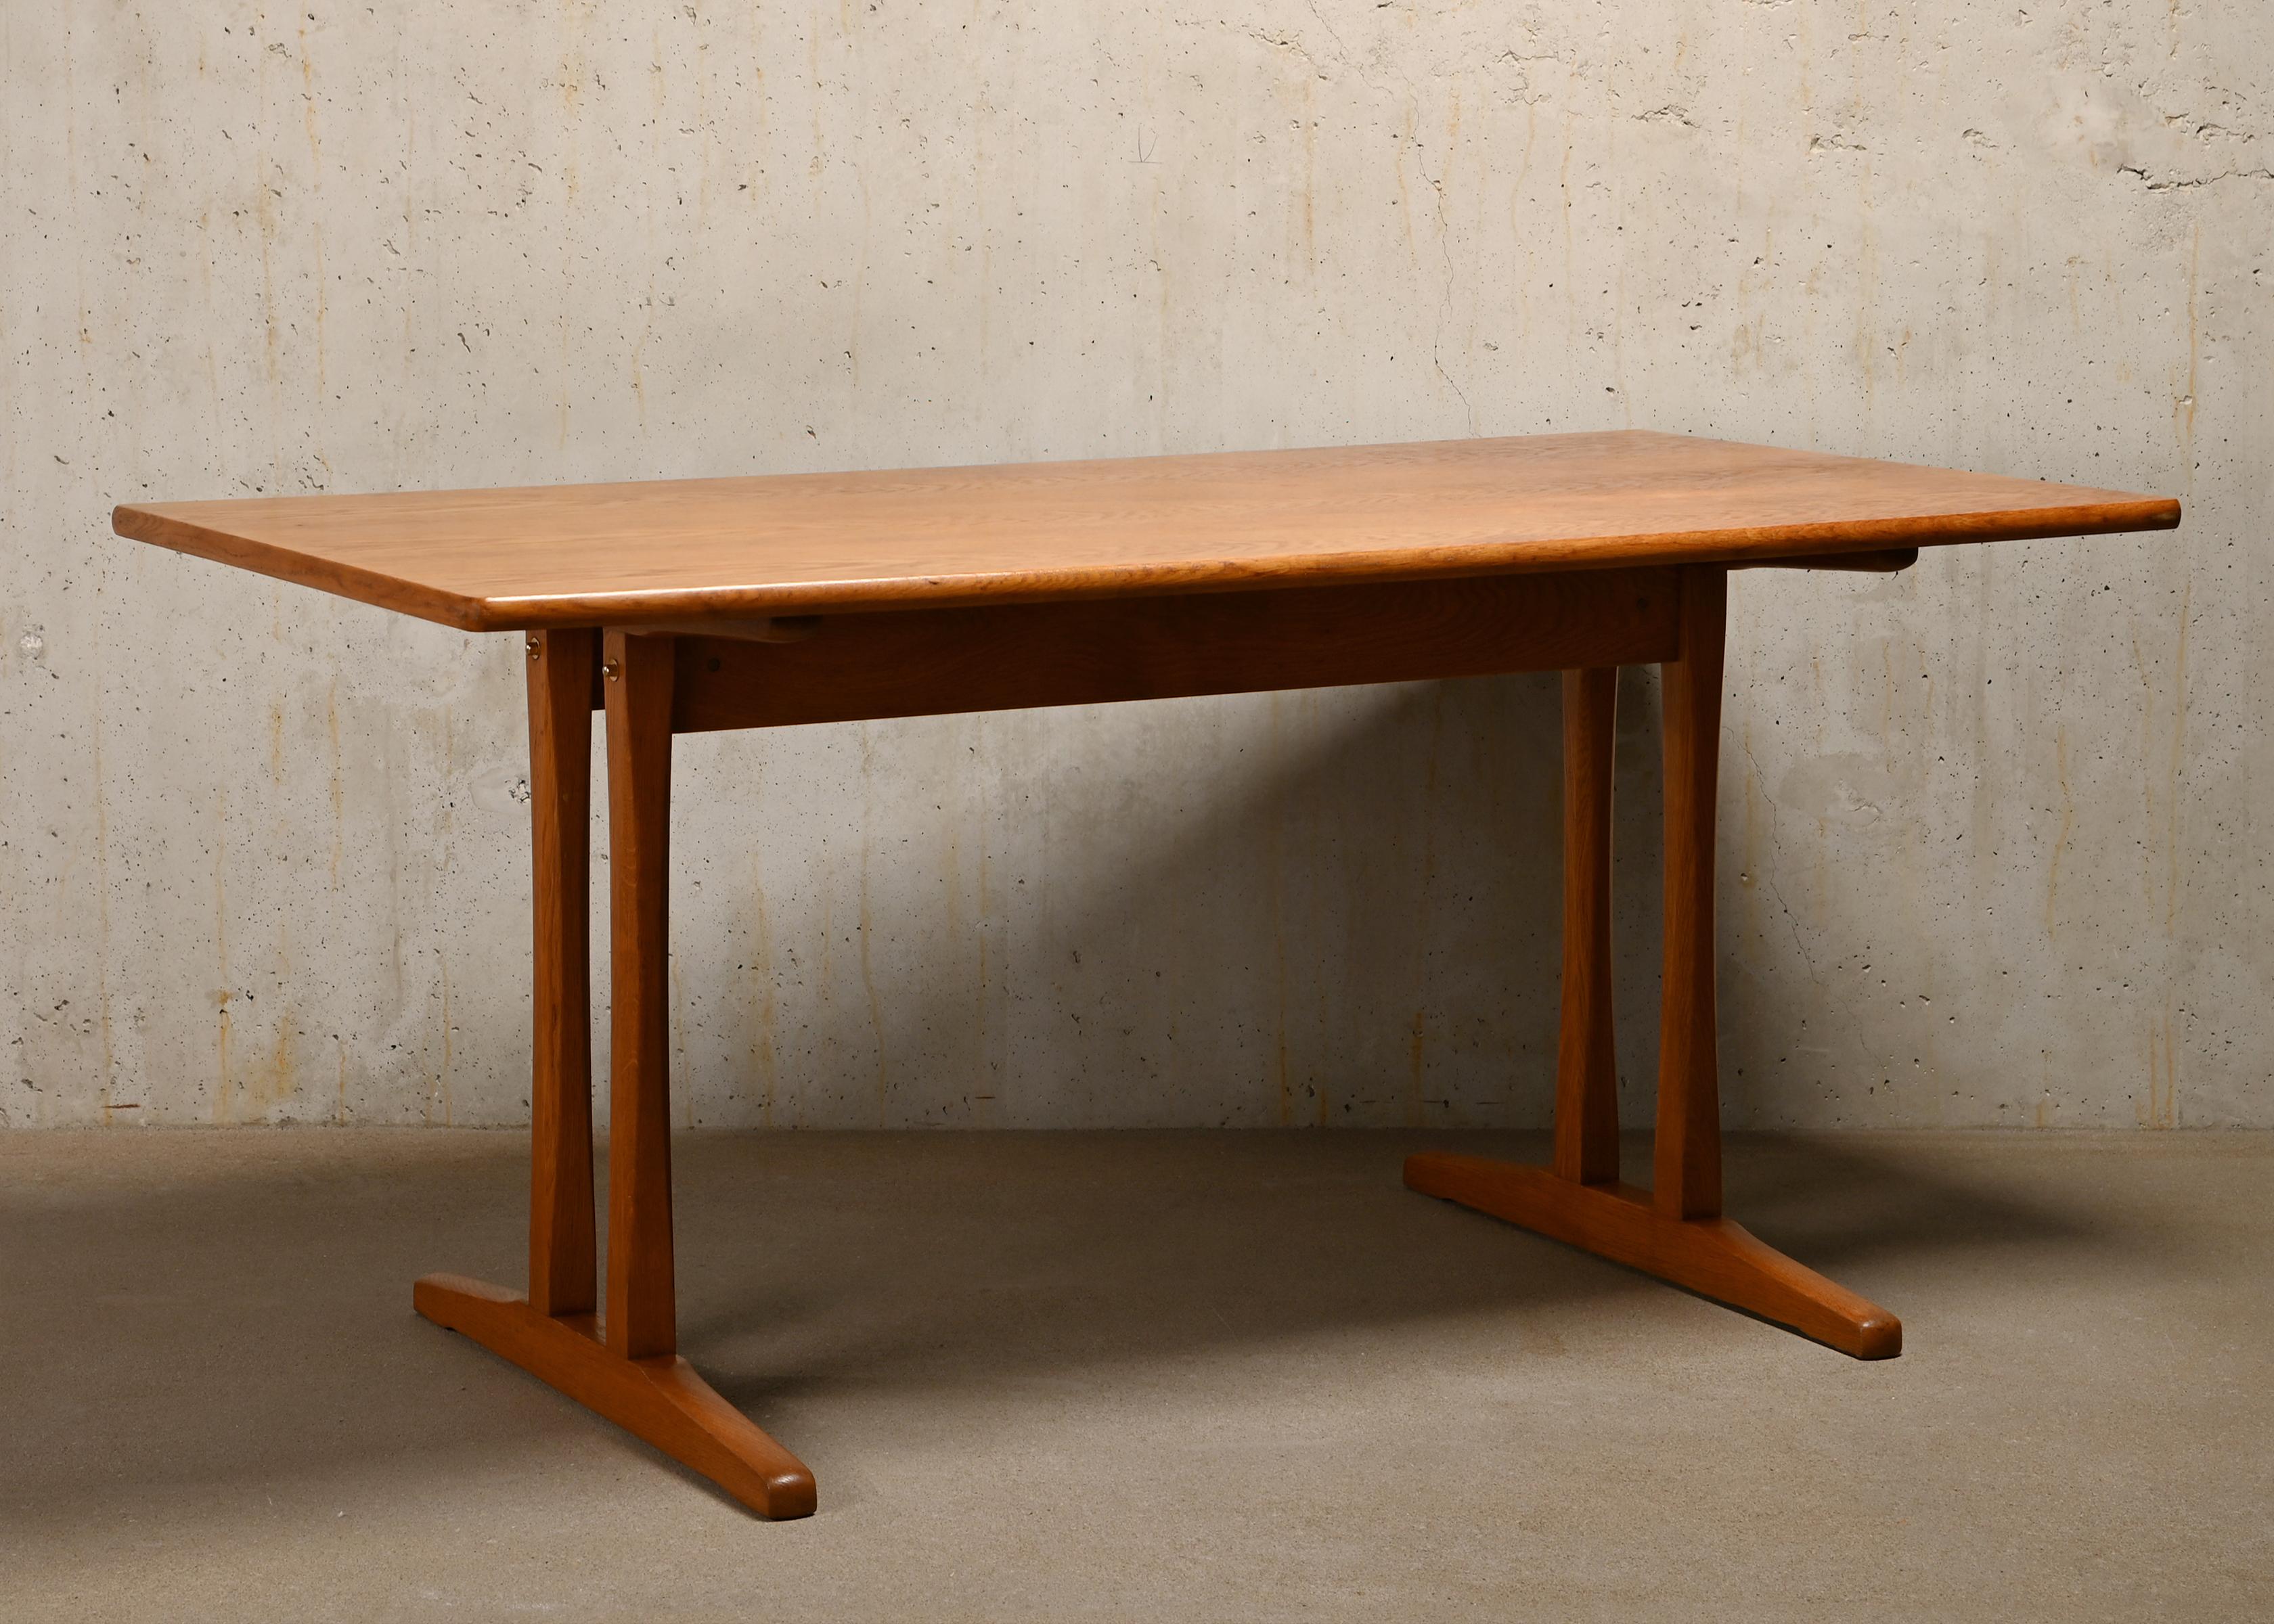 Solid and sturdy Oak Shaker table Model C-18 designed by Børge Mogensen in 1947 for FDB Møbler, Denmark. The table is in an unrestored good vintage condition with normal traces of use. Both tabletop and the nicely curved legs are made from hight